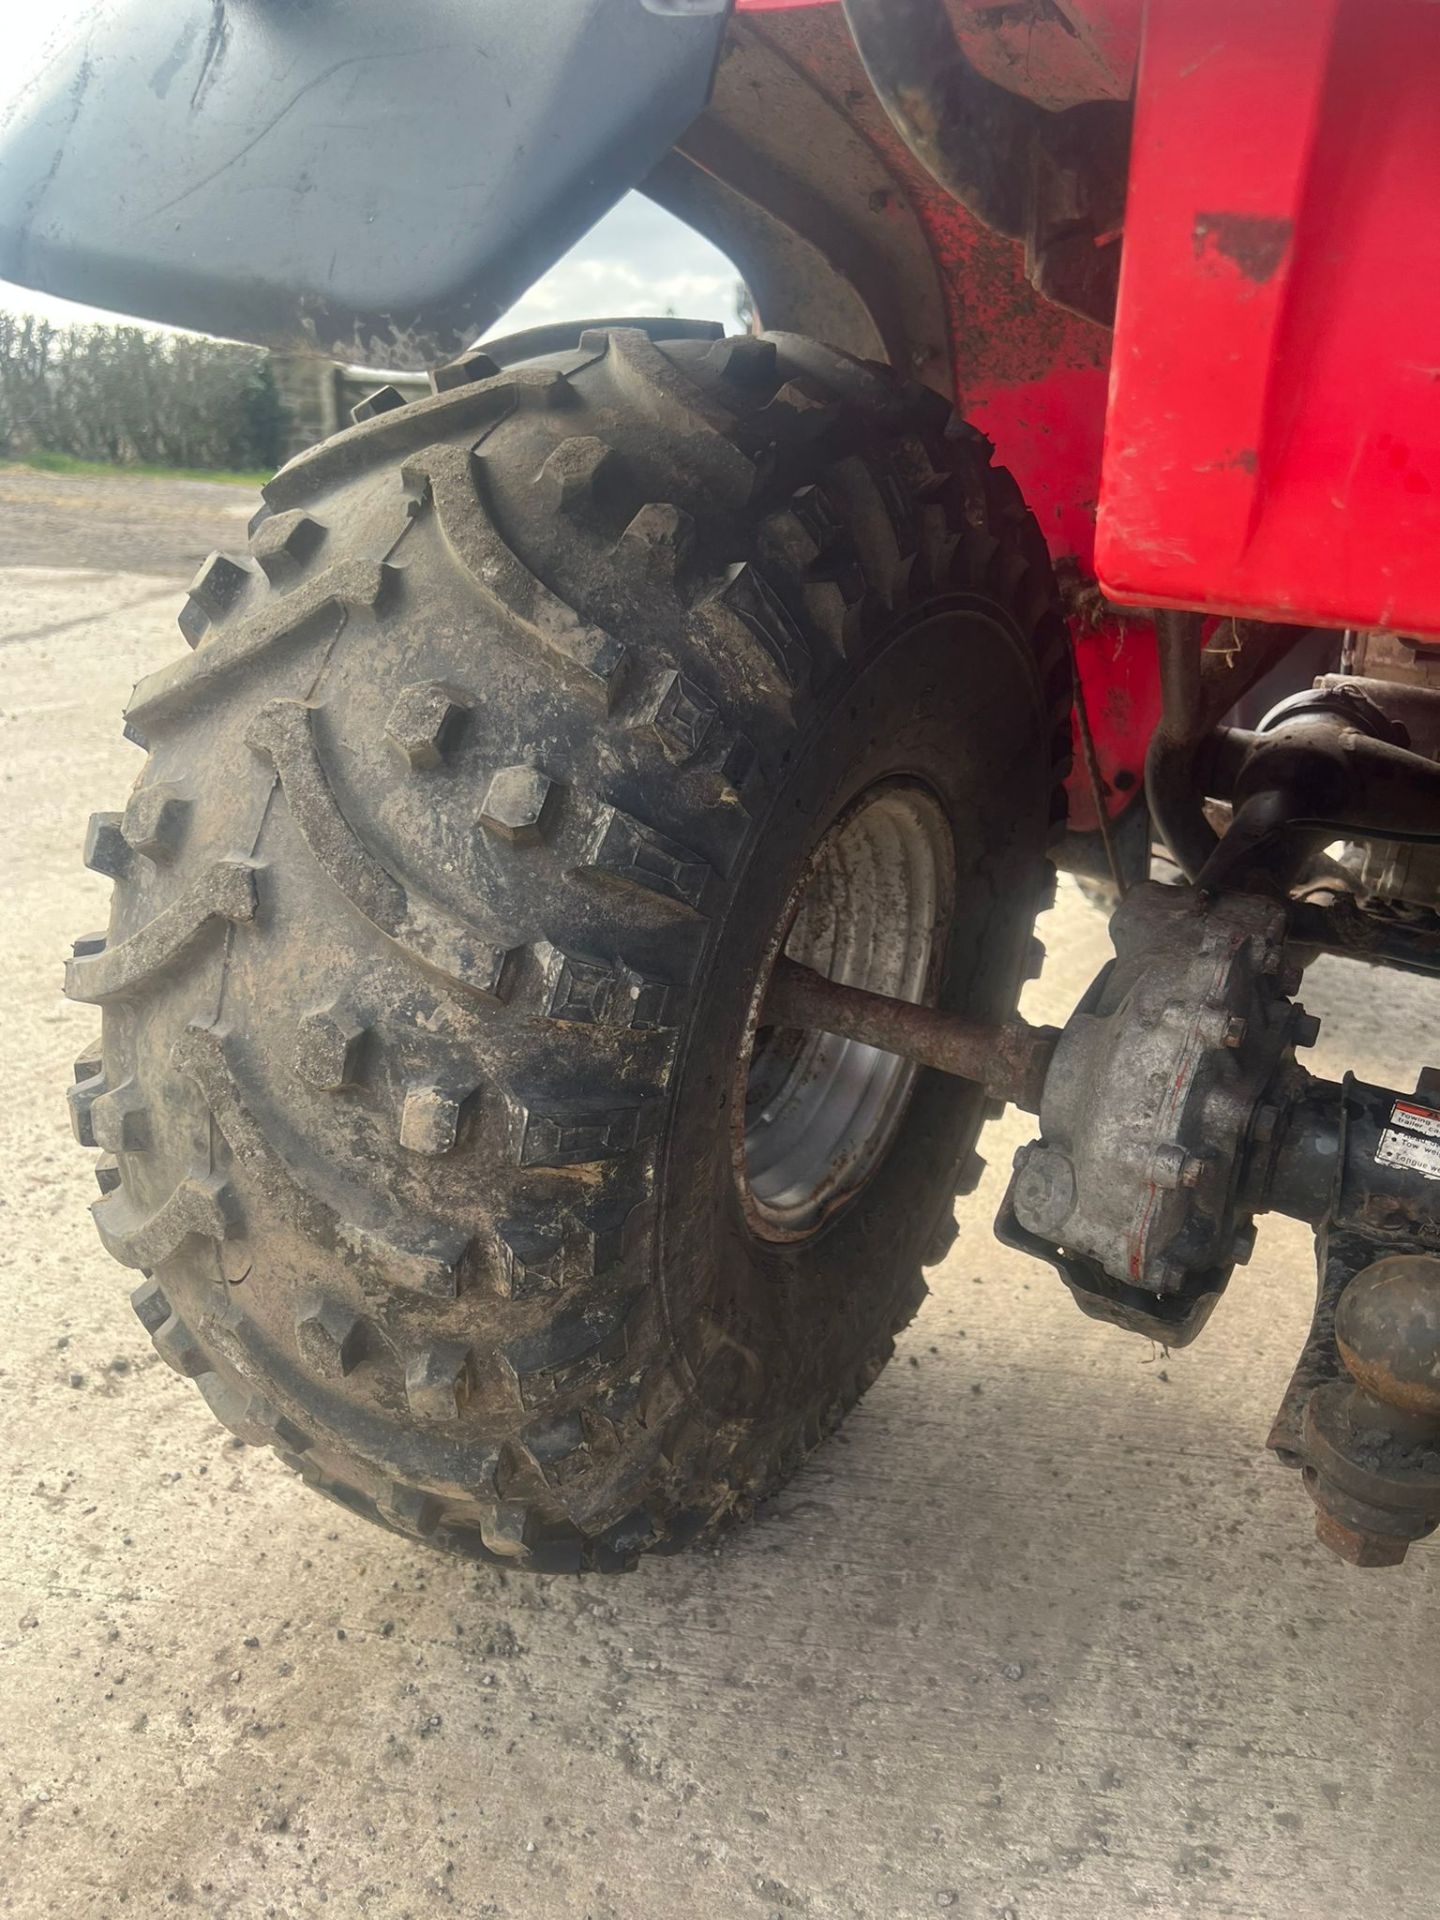 HONDA BIG RED FARM QUAD, TYRES ONLY A FEW MONTHS OLD, RUNS AND DRIVES *PLUS VAT* - Image 9 of 9